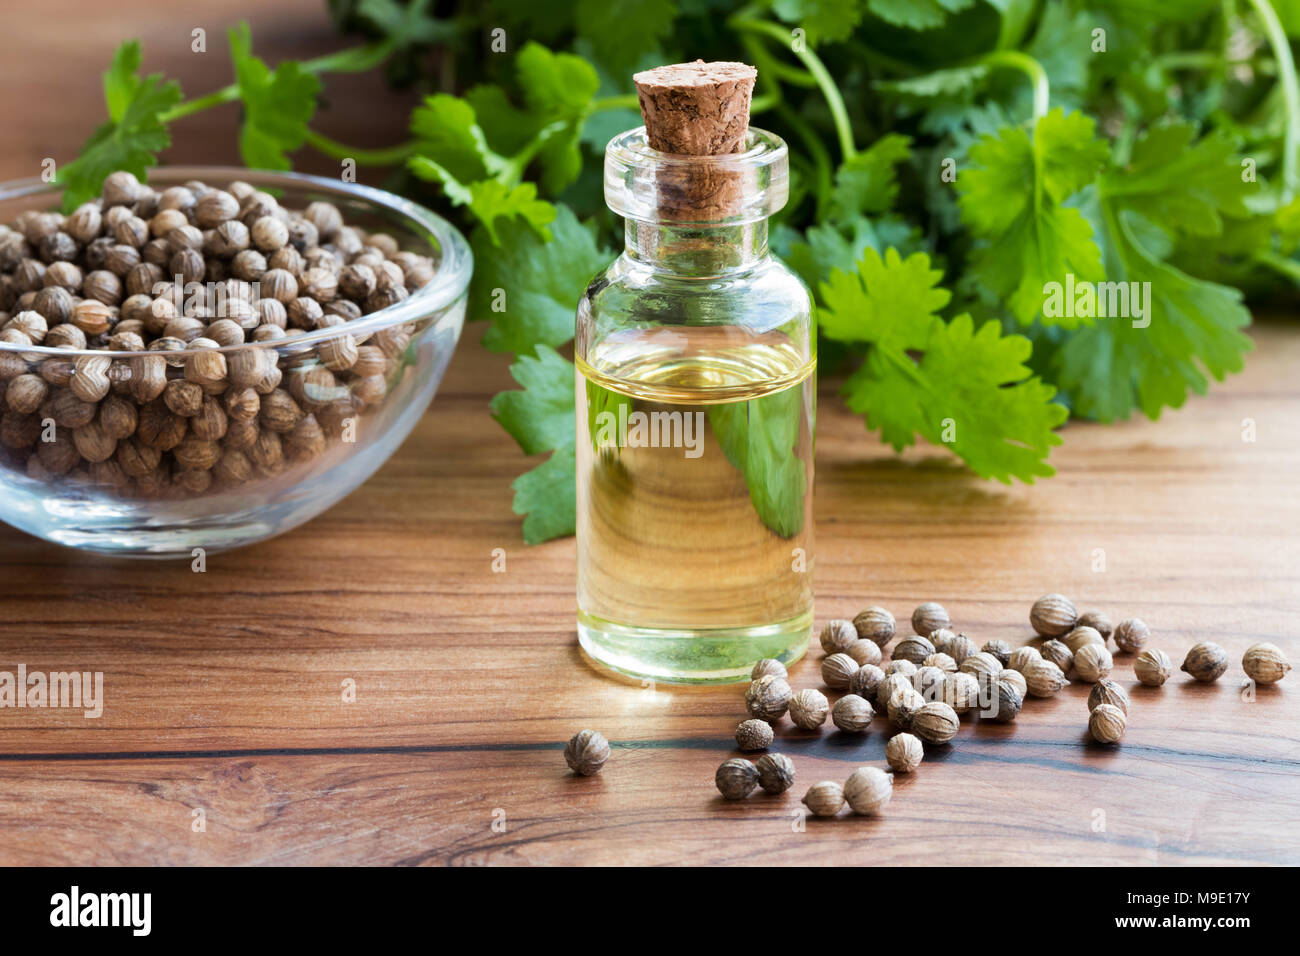 A bottle of coriander essential oil with coriander seeds and green cilantro leaves in the background Stock Photo